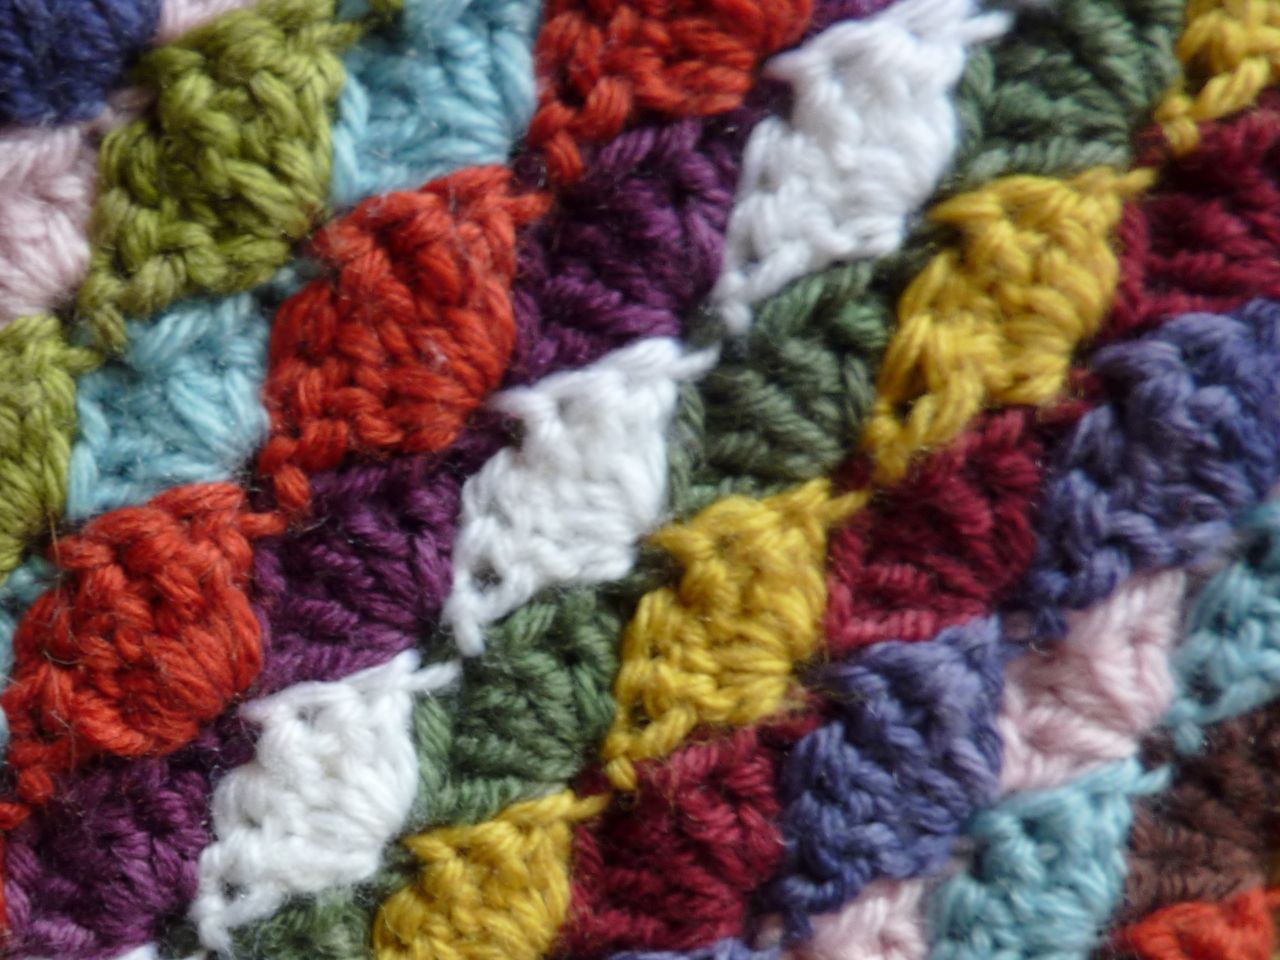 Video: Crochet: How to Chain Stitch | eHow.com